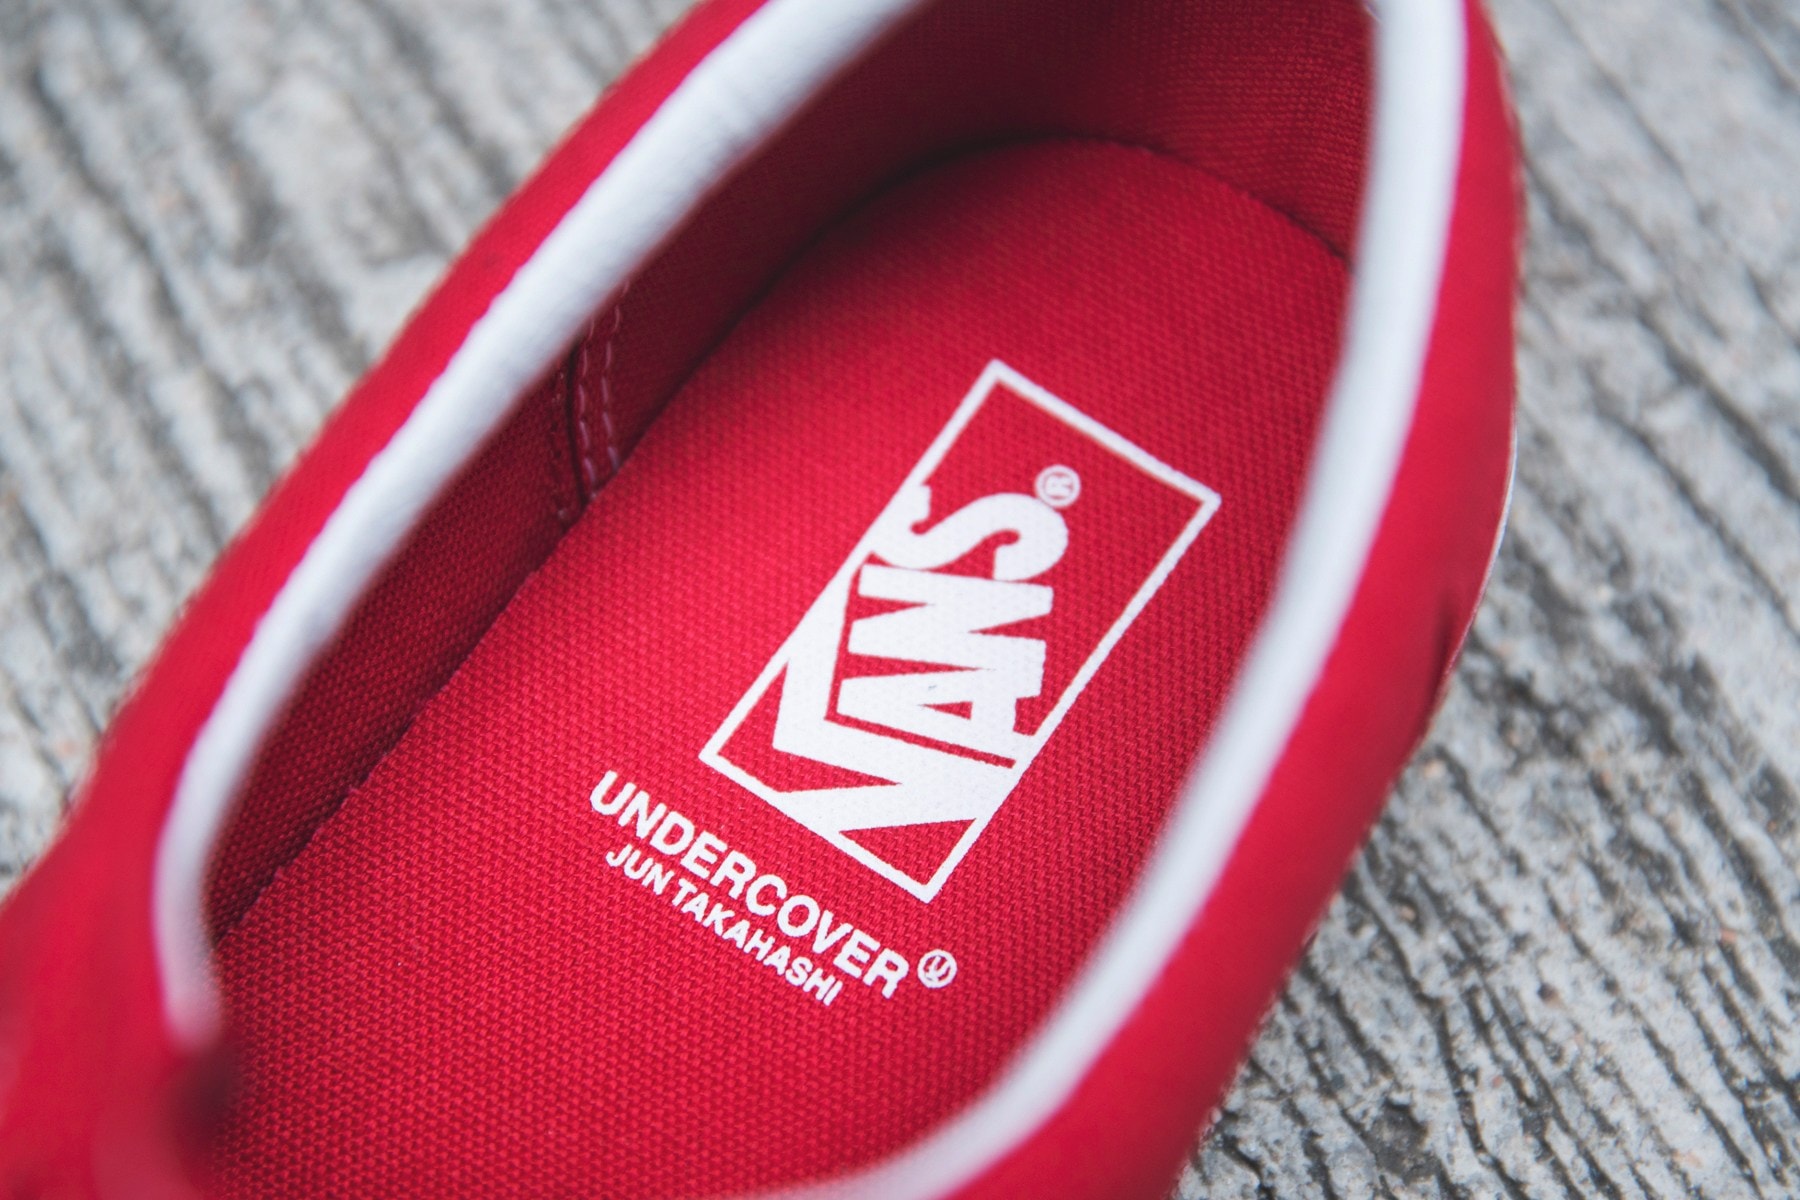 UNDERCOVER & Vault by Vans 2017 Collaboration